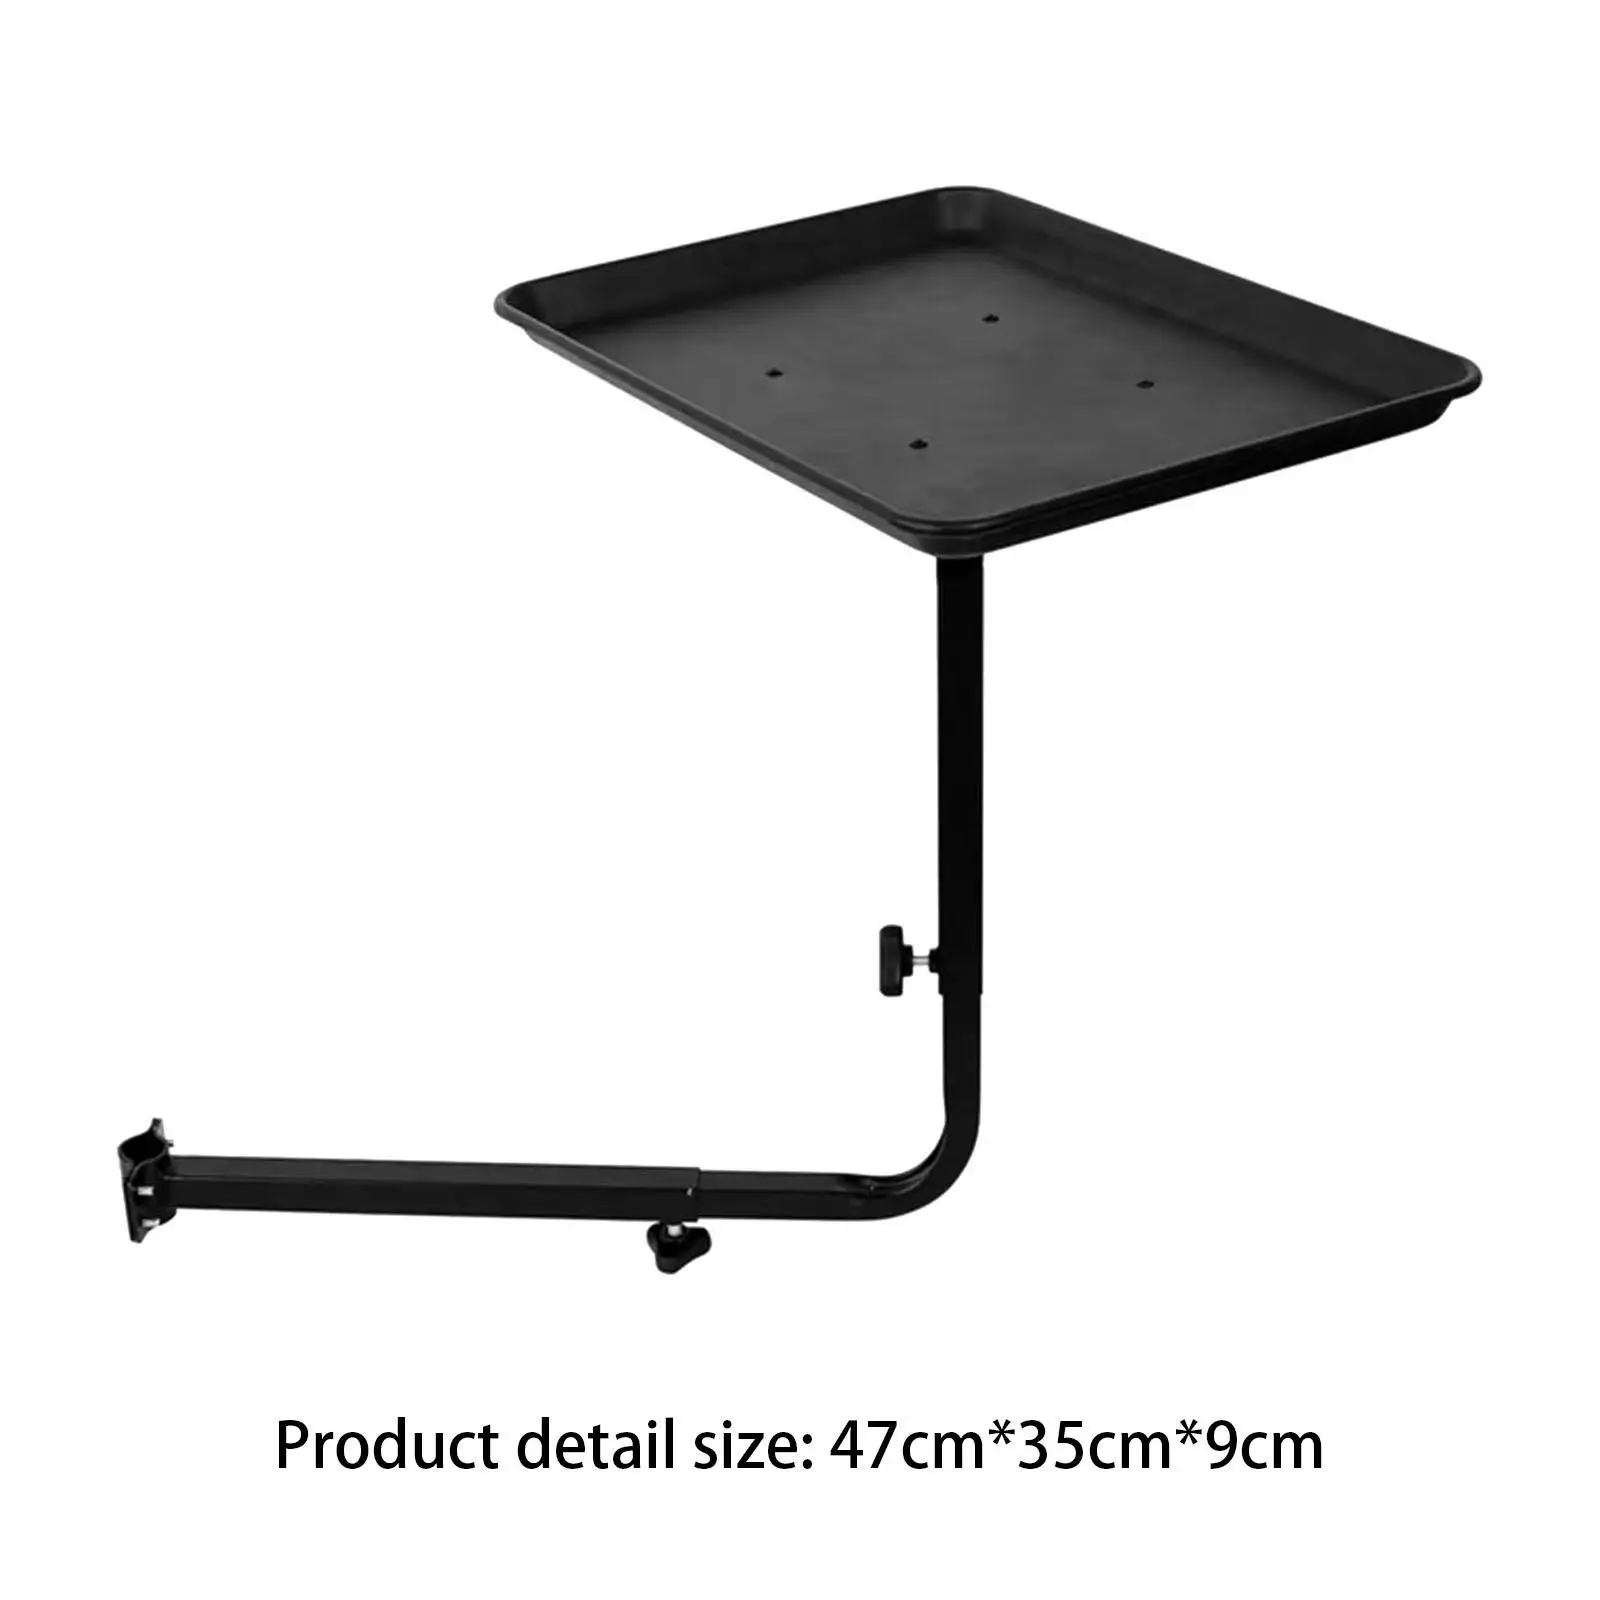 Adjustable Salon Chair Tray for Hair Styling and Beauty Care